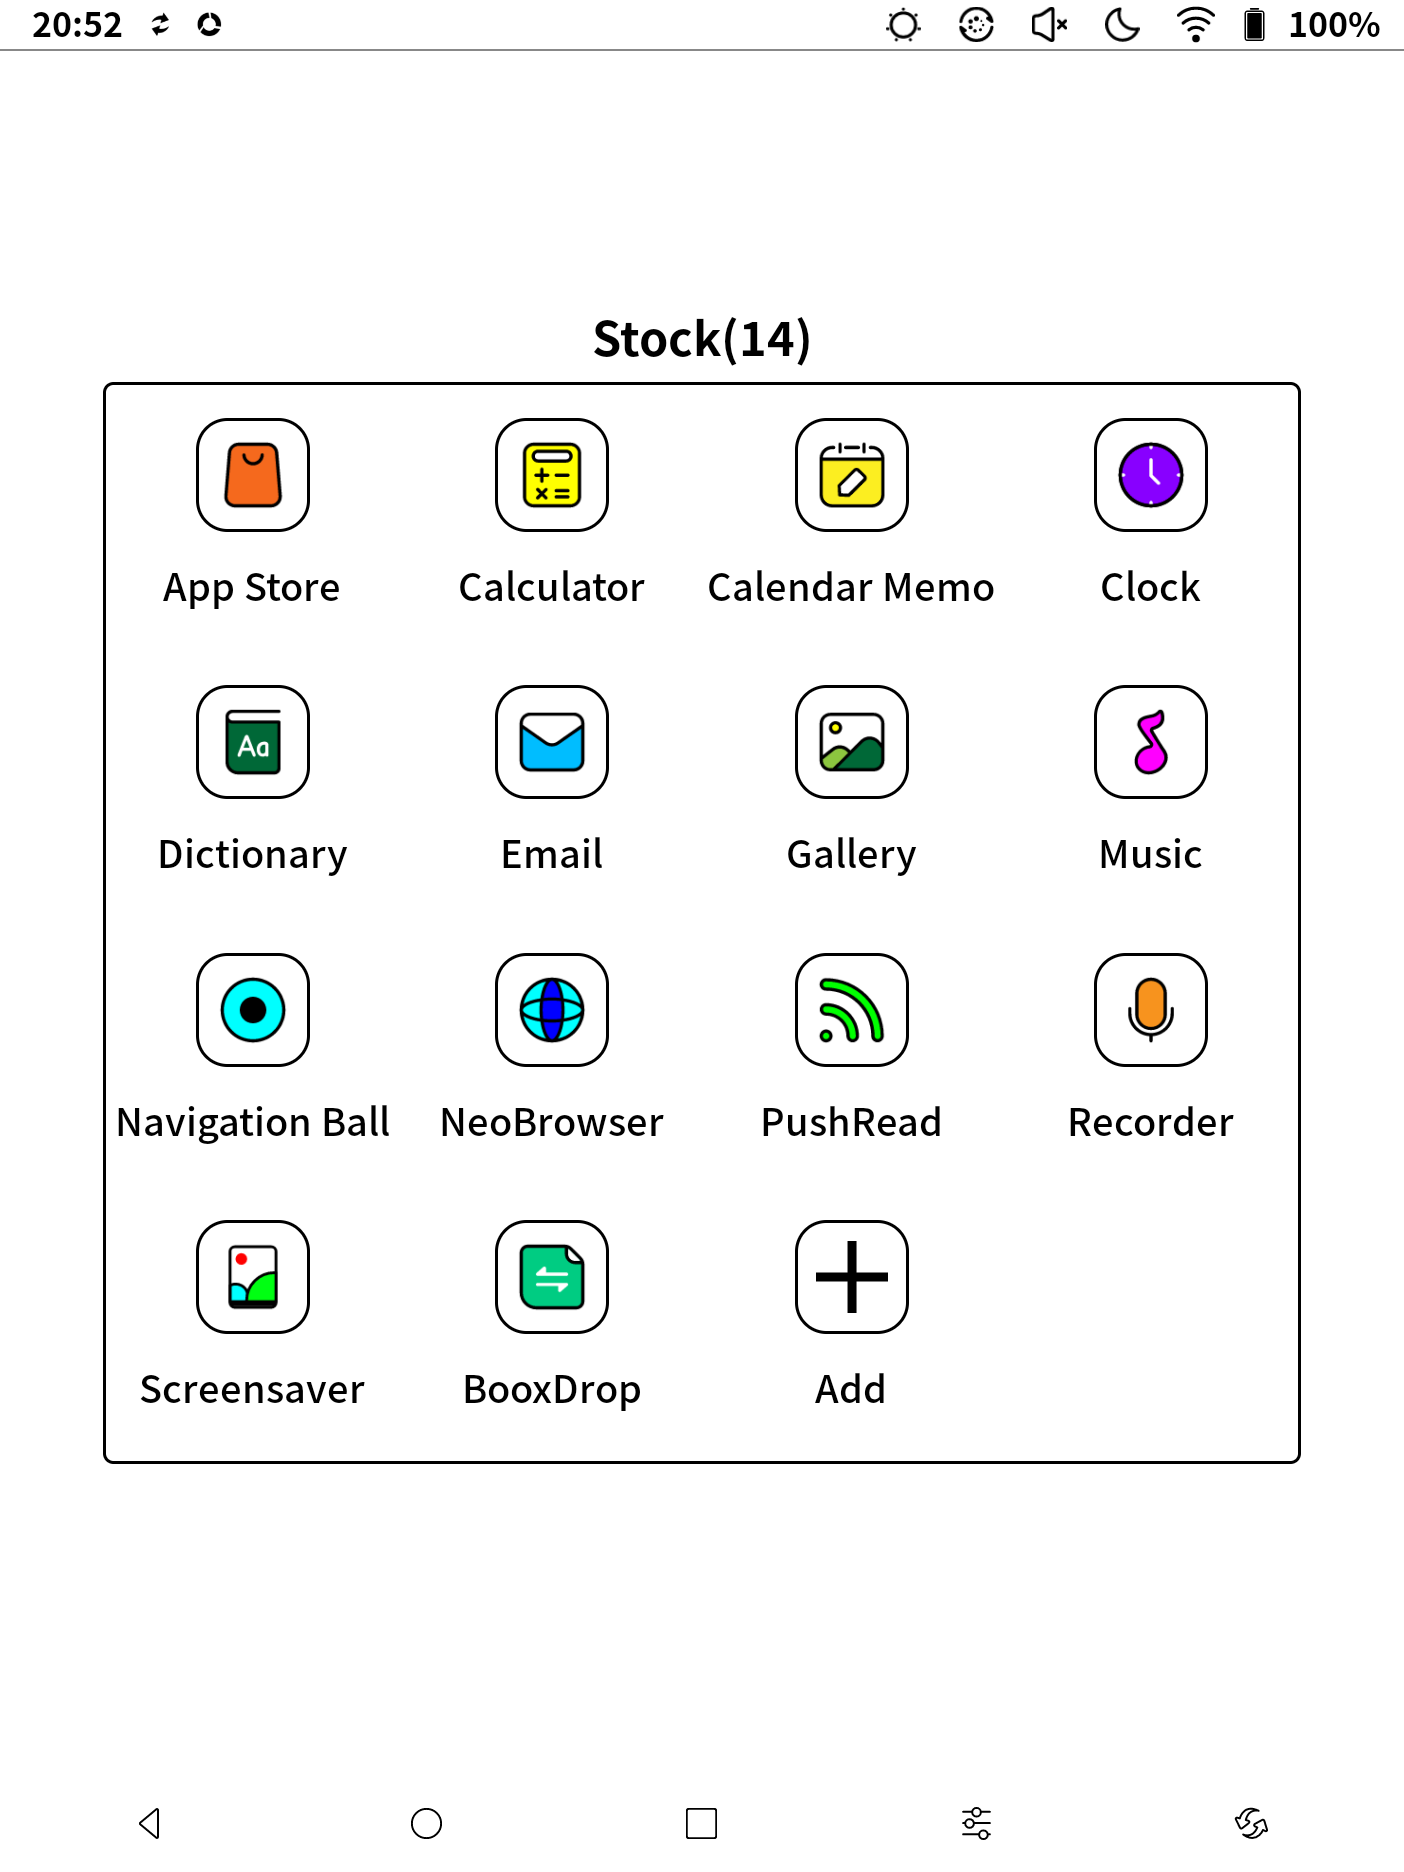 View of the Stock folder, 14 items. From left to right and top to bottom: App Store, Calculator, Calendar Memo, Clock, Dictionary, Email, Gallery, Music, Navigation Ball, NeoBrowser, PushRead, Recorder, Screensaver, BooxDrop and a button to add more.